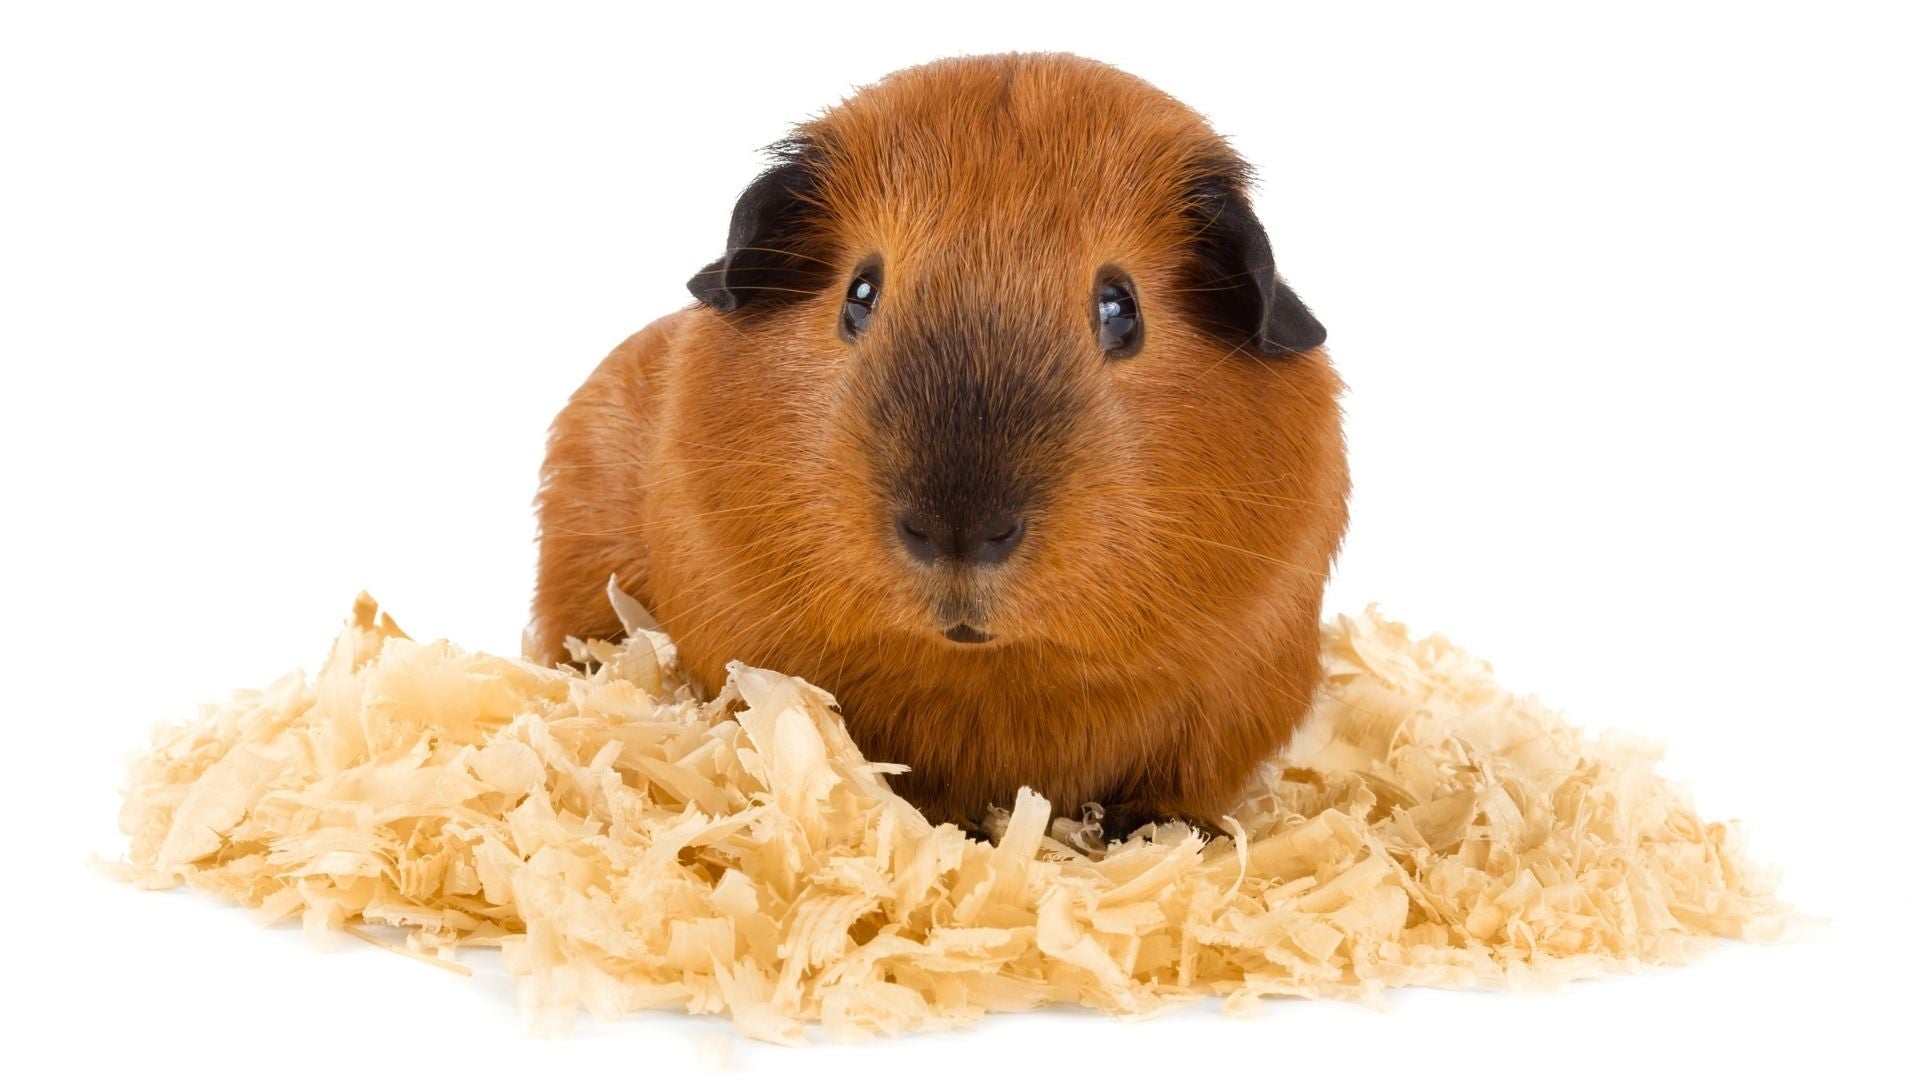 ginger guinea pig with black ears and face sat on wood shavings on white background allergies